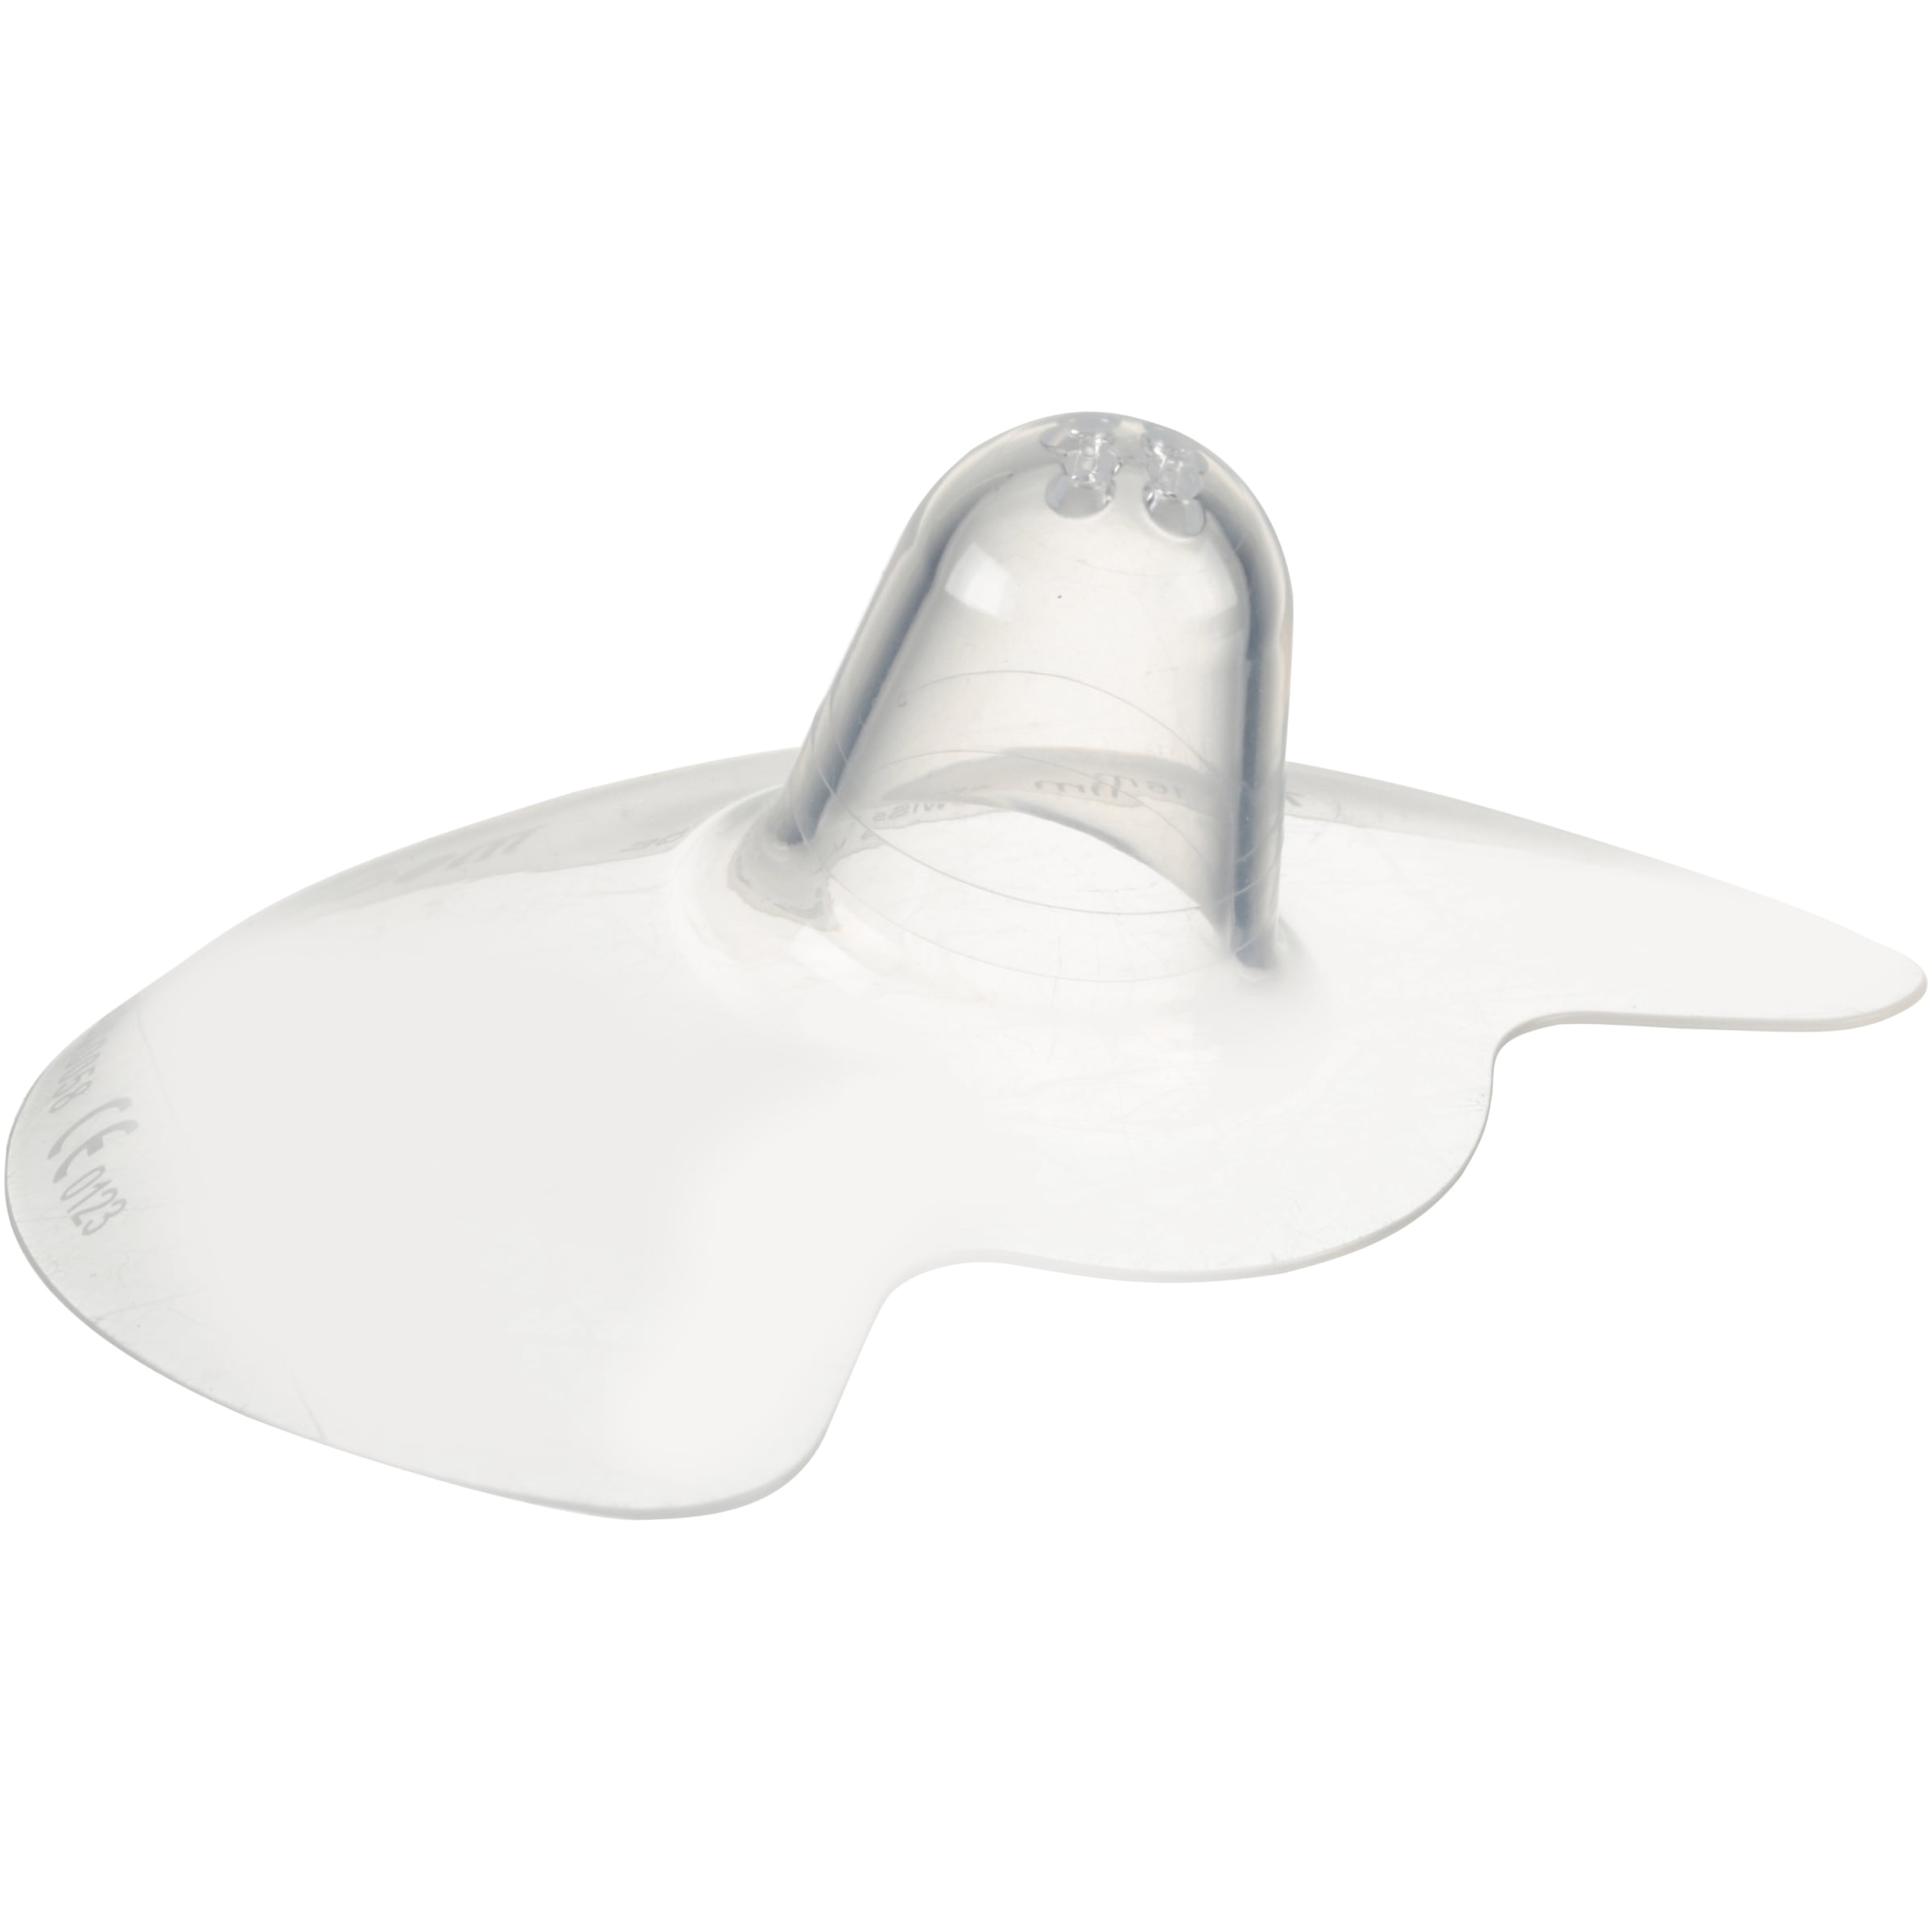 Medela Breastfeeding Contact Nipple Shield - Clear, Pack of 2, 16mm  (101034109) 20451330143